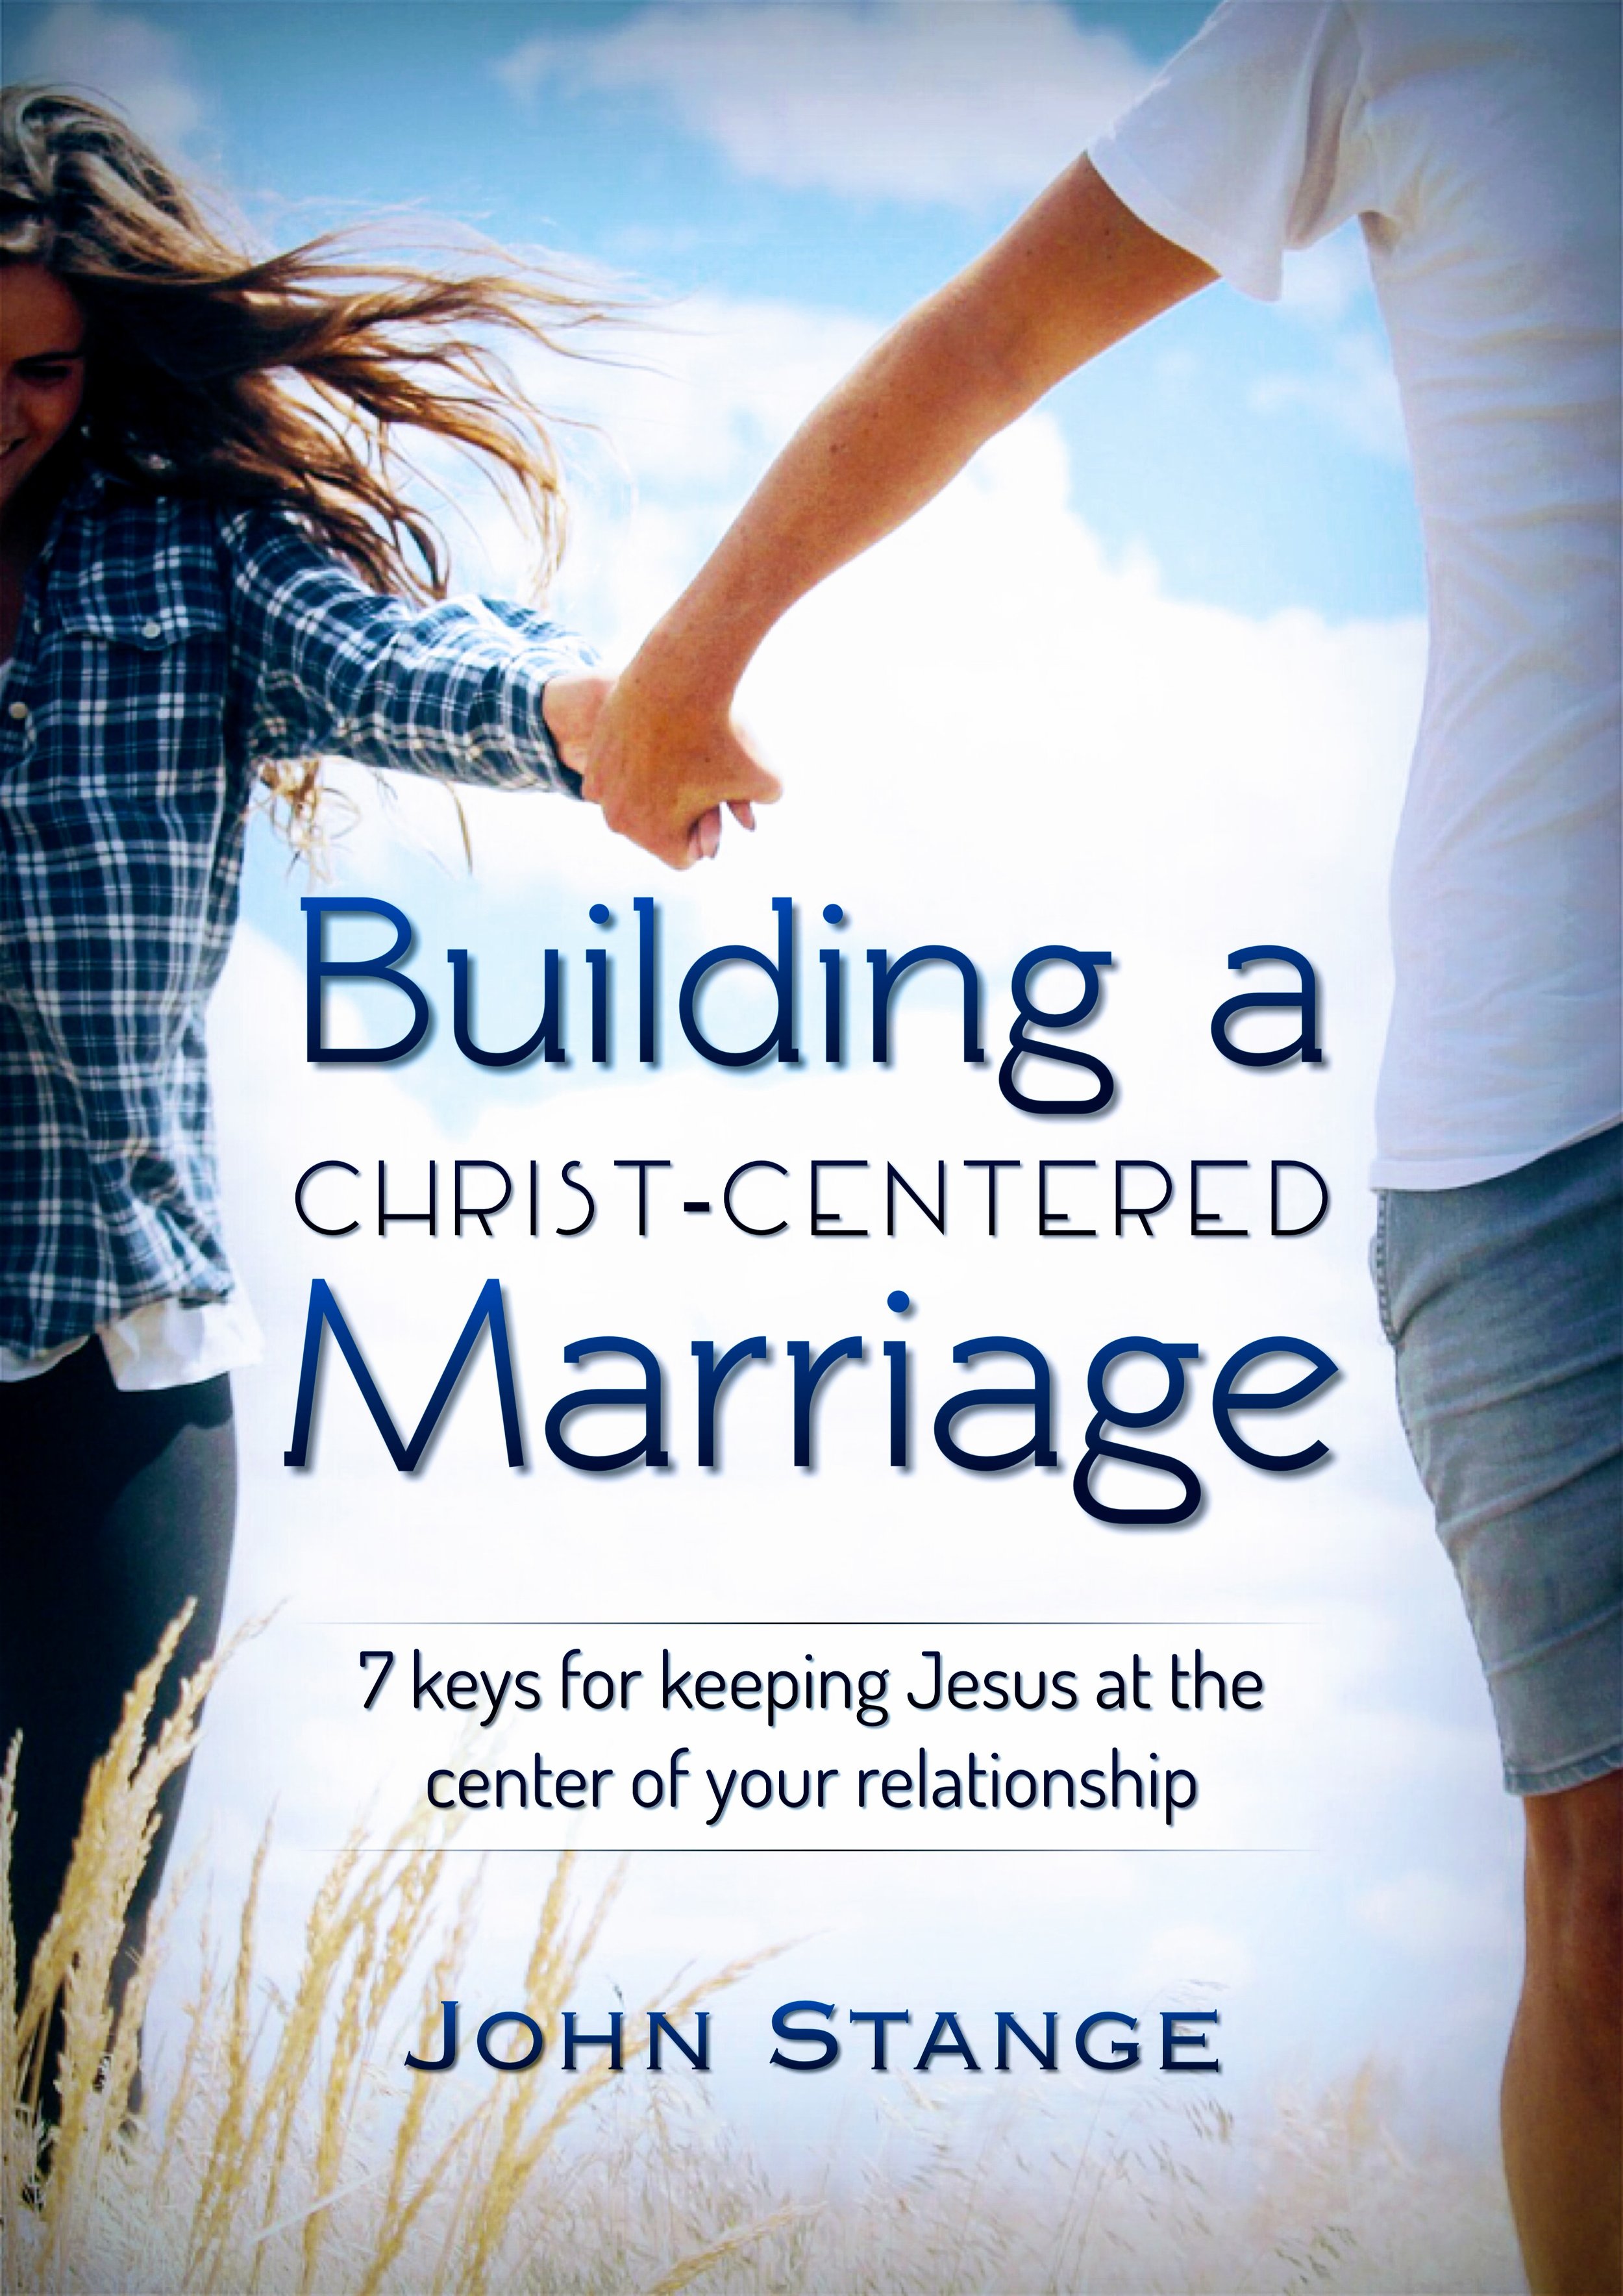 Building a Christ Centered Marriage.JPG